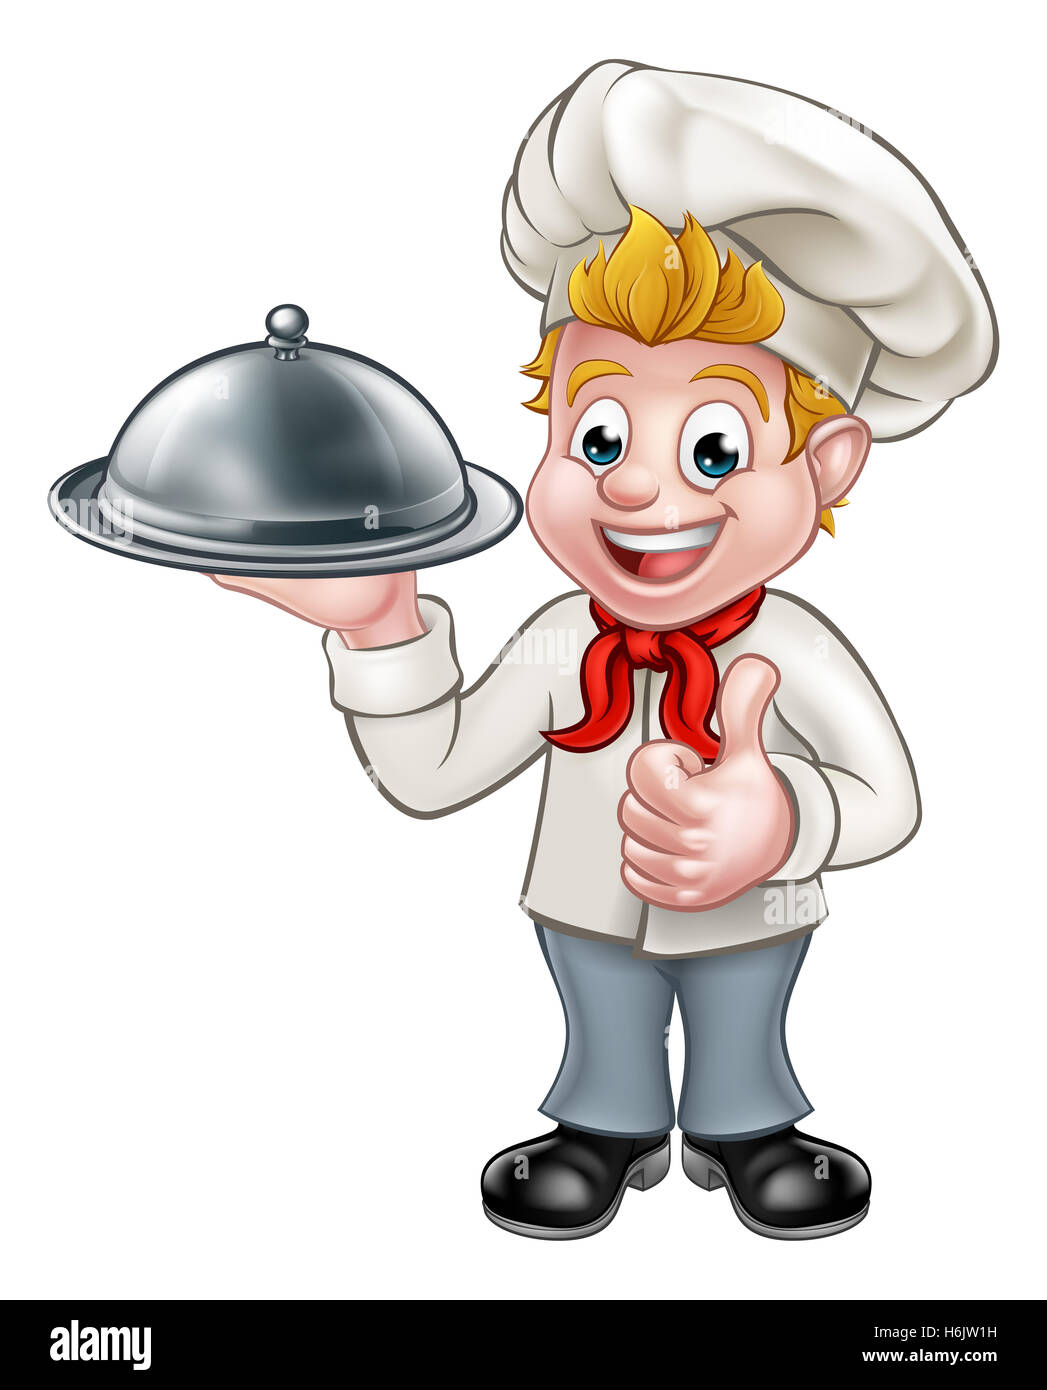 Cartoon chef or baker character giving thumbs up and holding a plate cloche domed tray Stock Photo